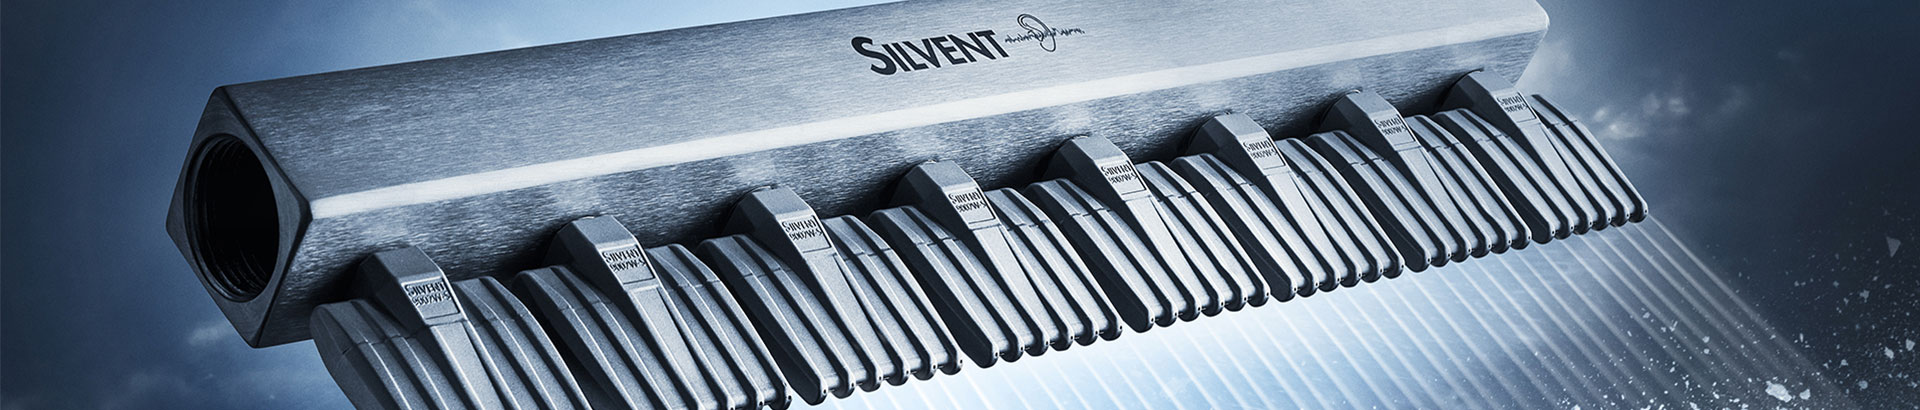 Silvent air knife with air jets on gray background.